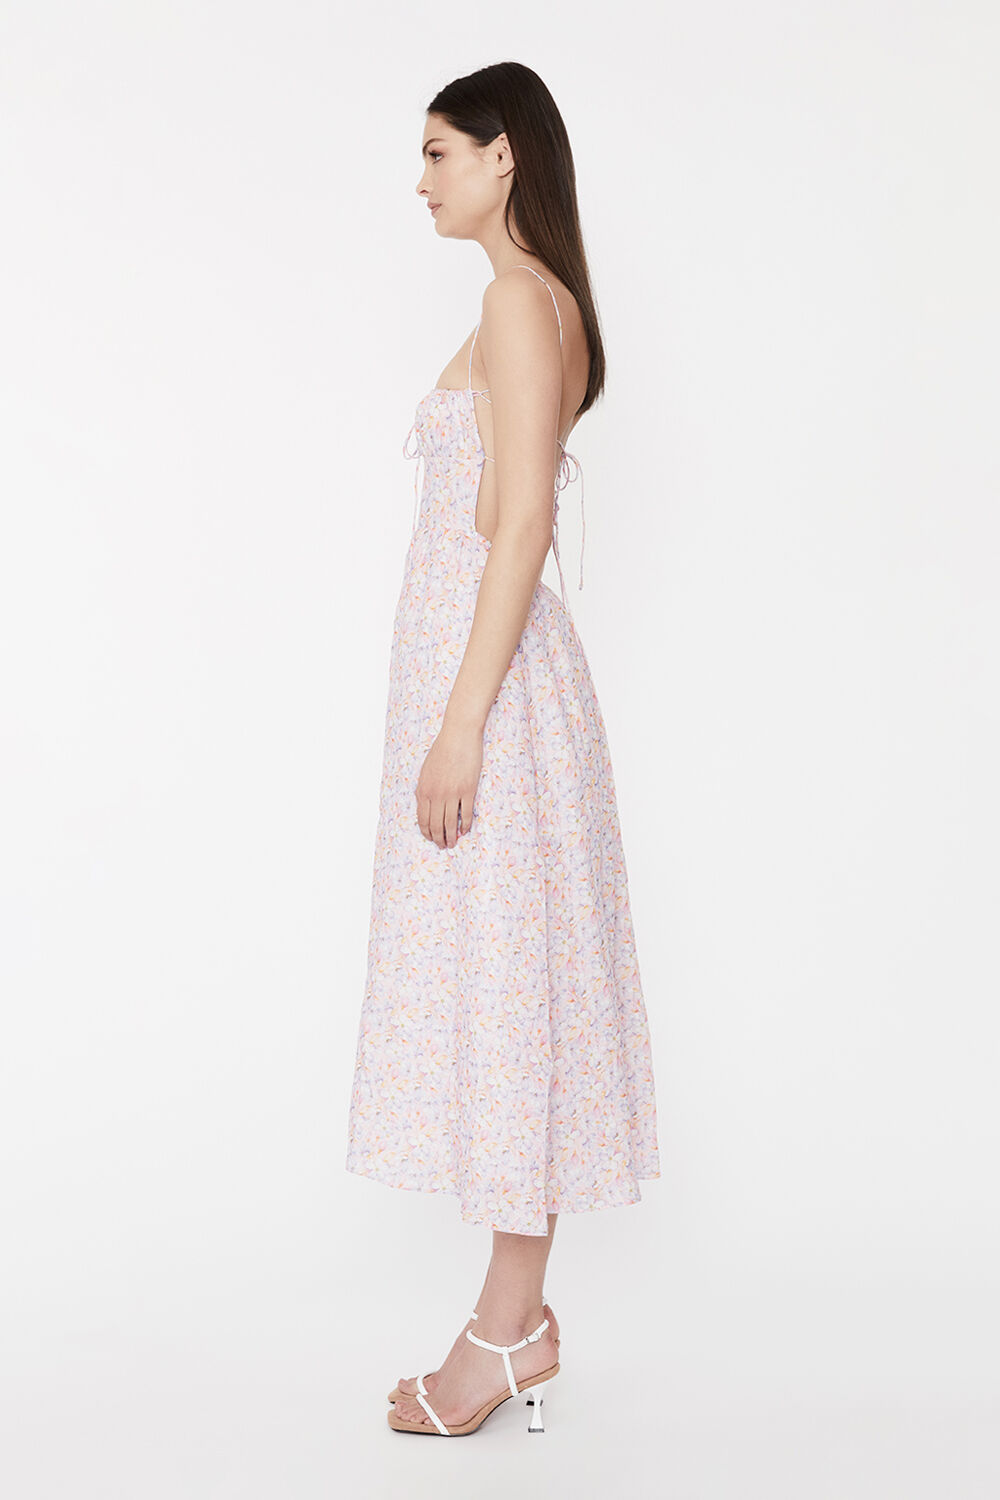 SPRING FLORAL MIDI DRESS in colour DRESS BLUES